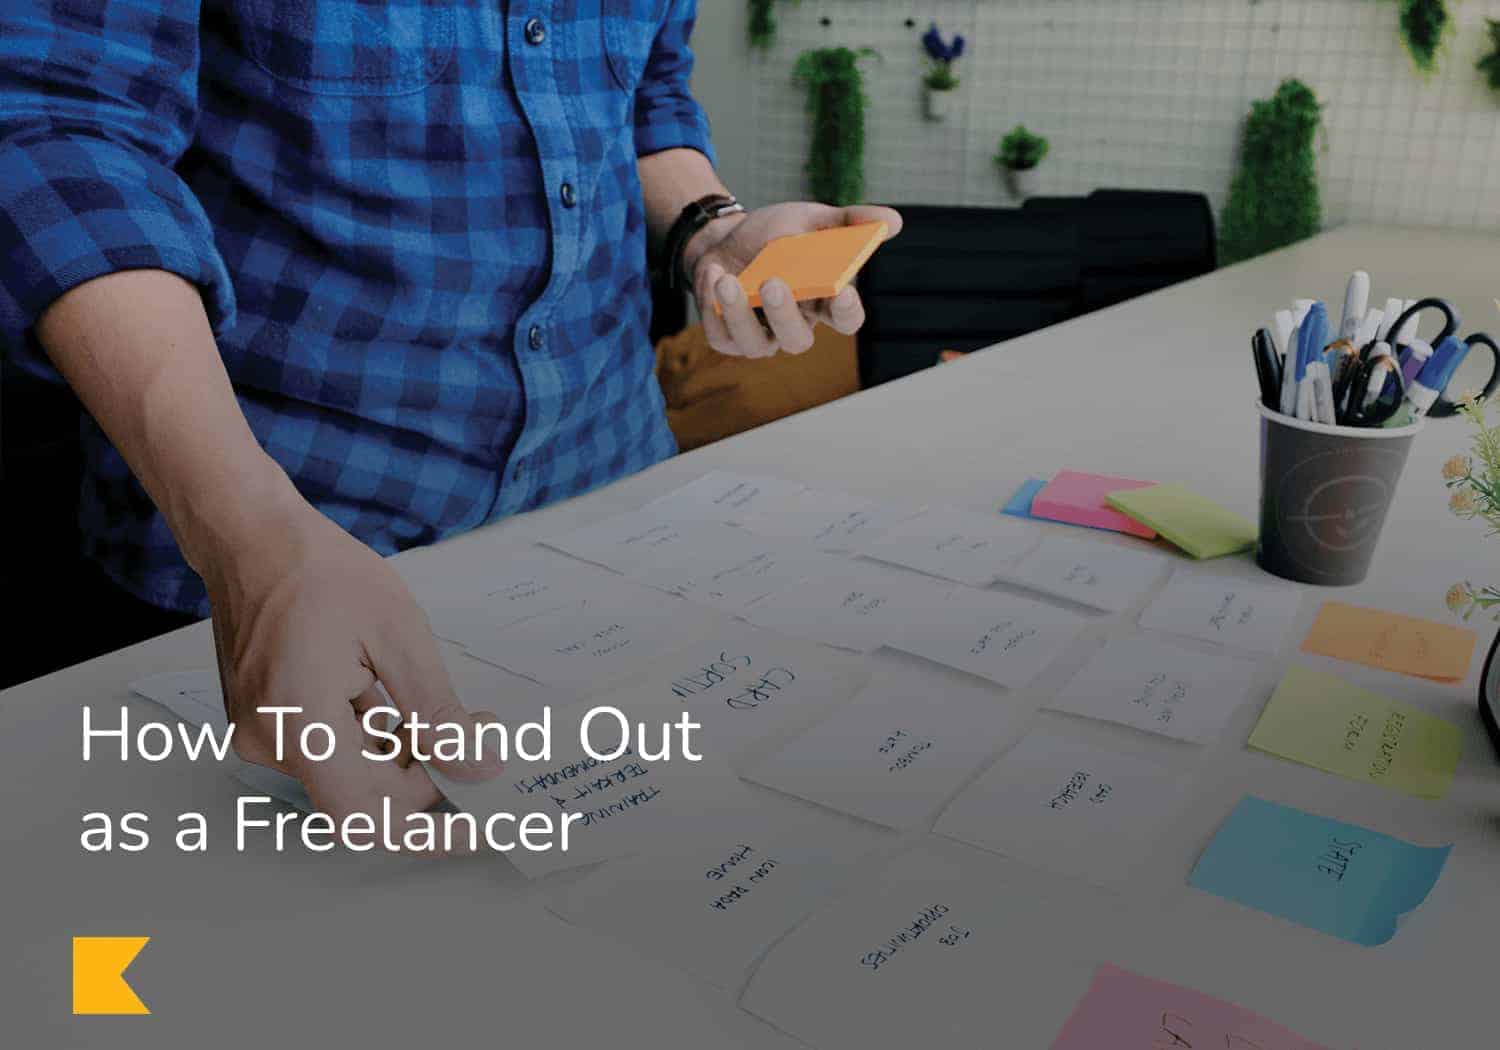 How To Stand Out as a Freelancer